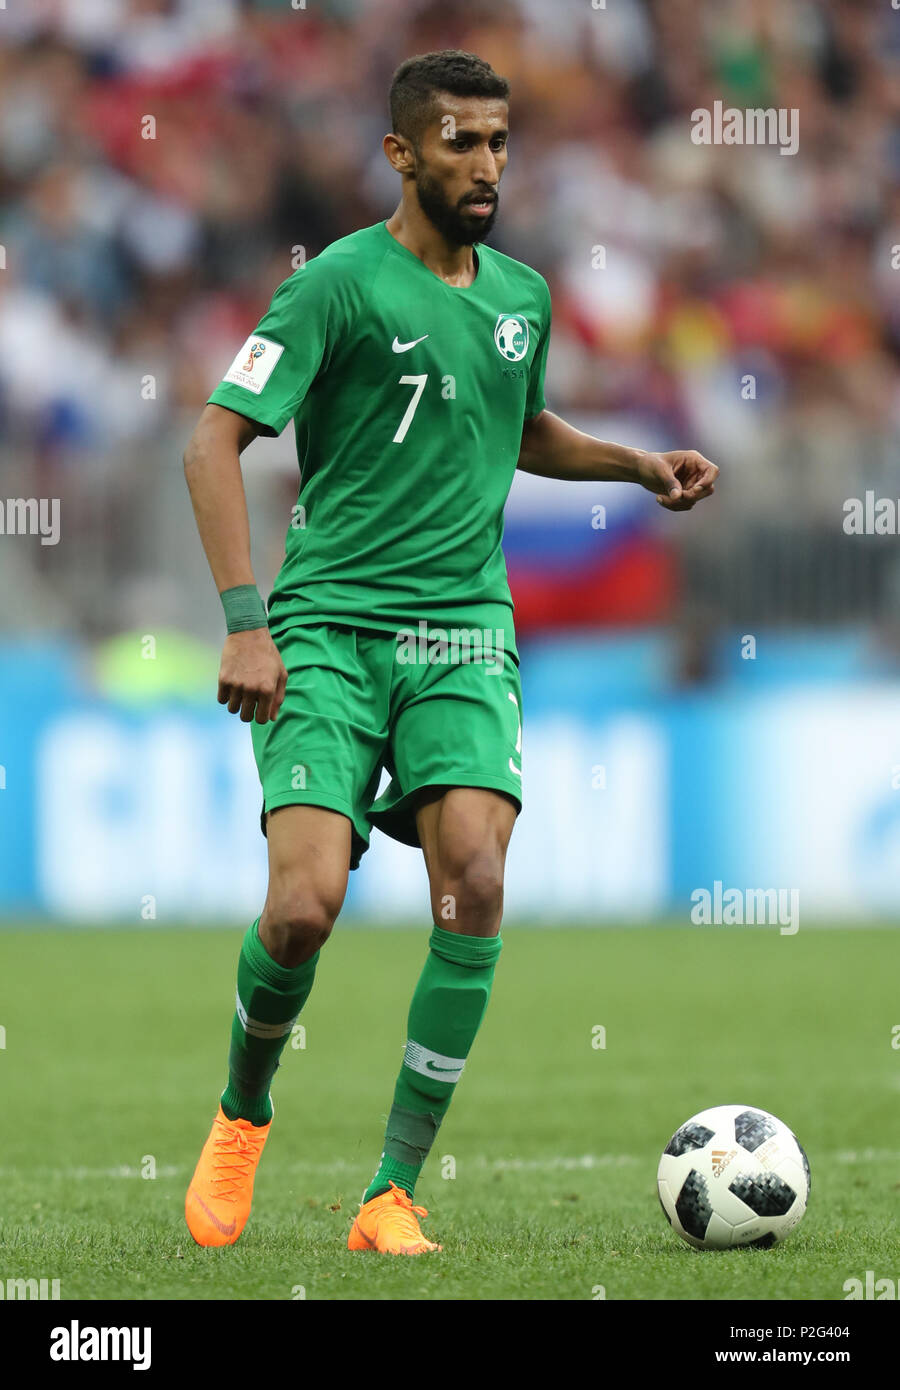 Salman Al-Faraj SAUDI ARABIA RUSSIA V SAUDI ARABIA, 2018 FIFA WORLD CUP RUSSIA 14 June 2018 GBC8066 Russia v Saudi Arabia 2018 FIFA World Cup Russia STRICTLY EDITORIAL USE ONLY. If The Player/Players Depicted In This Image Is/Are Playing For An English Club Or The England National Team. Then This Image May Only Be Used For Editorial Purposes. No Commercial Use. The Following Usages Are Also Restricted EVEN IF IN AN EDITORIAL CONTEXT: Use in conjuction with, or part of, any unauthorized audio, video, data, fixture lists, club/league logos, Betting, Games or any 'live' servic Stock Photo